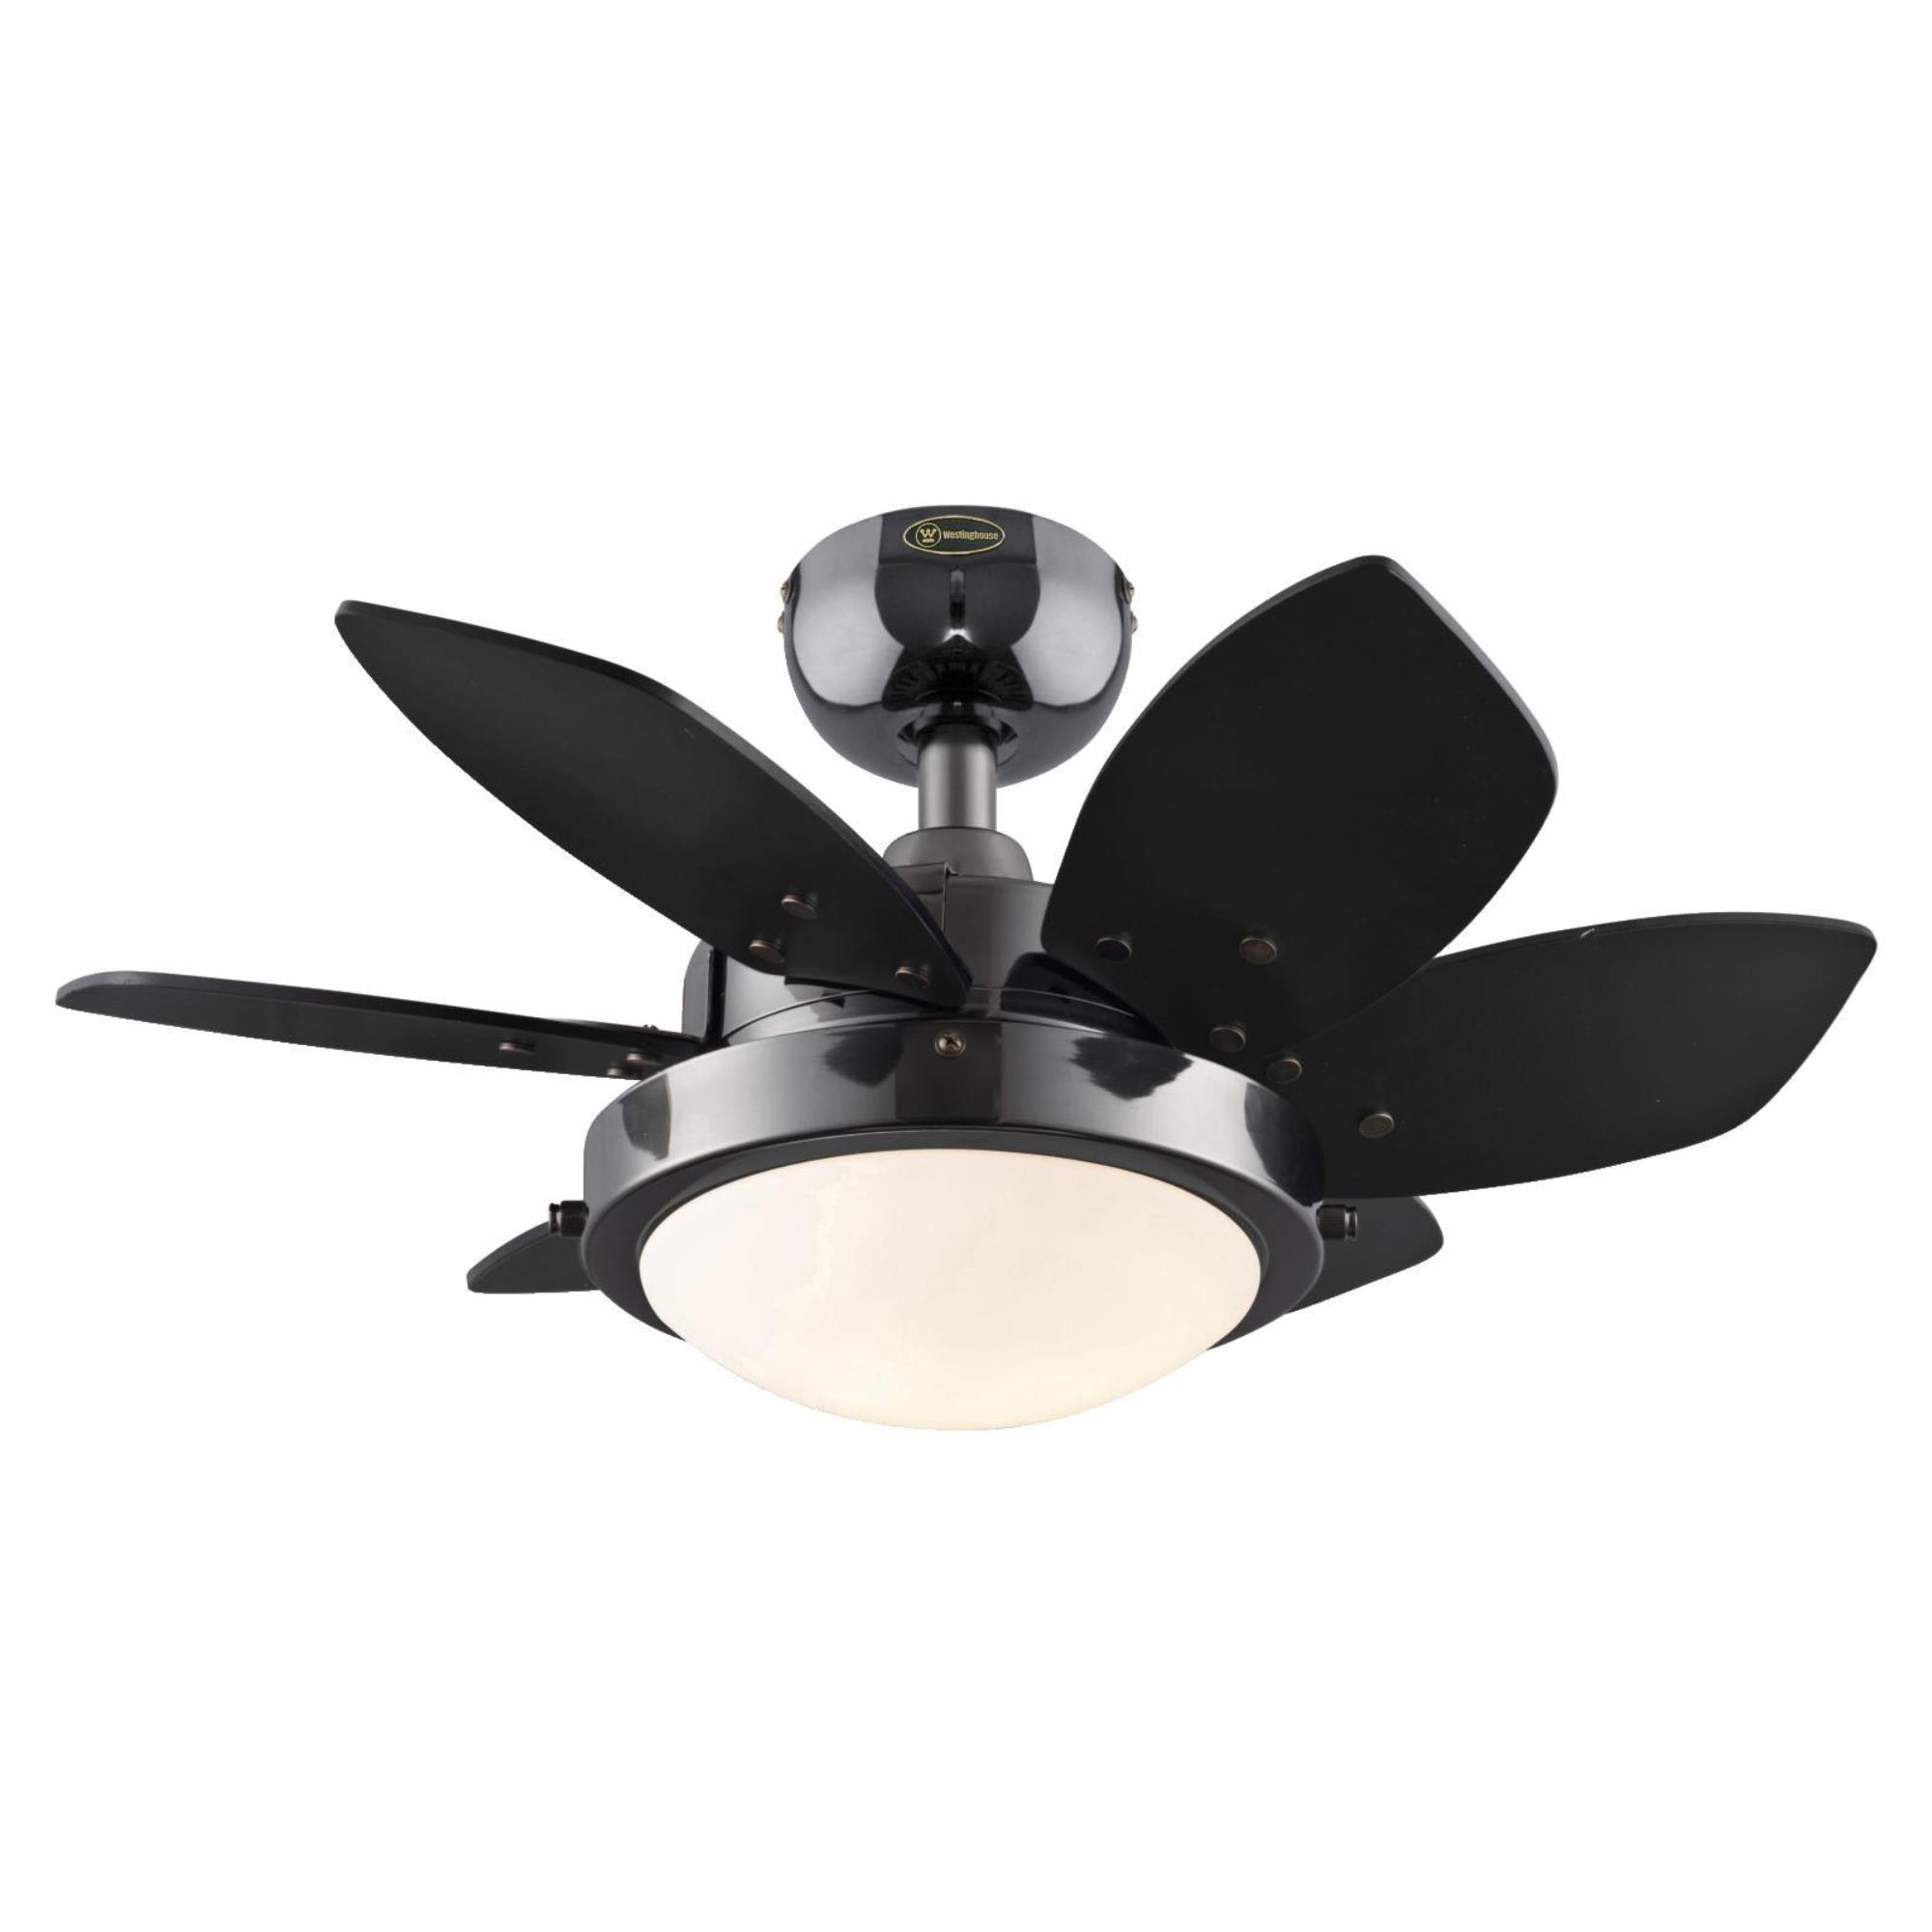 Quince 24-Inch Reversible Six-Blade Indoor Ceiling Fan Westinghouse 7236600 